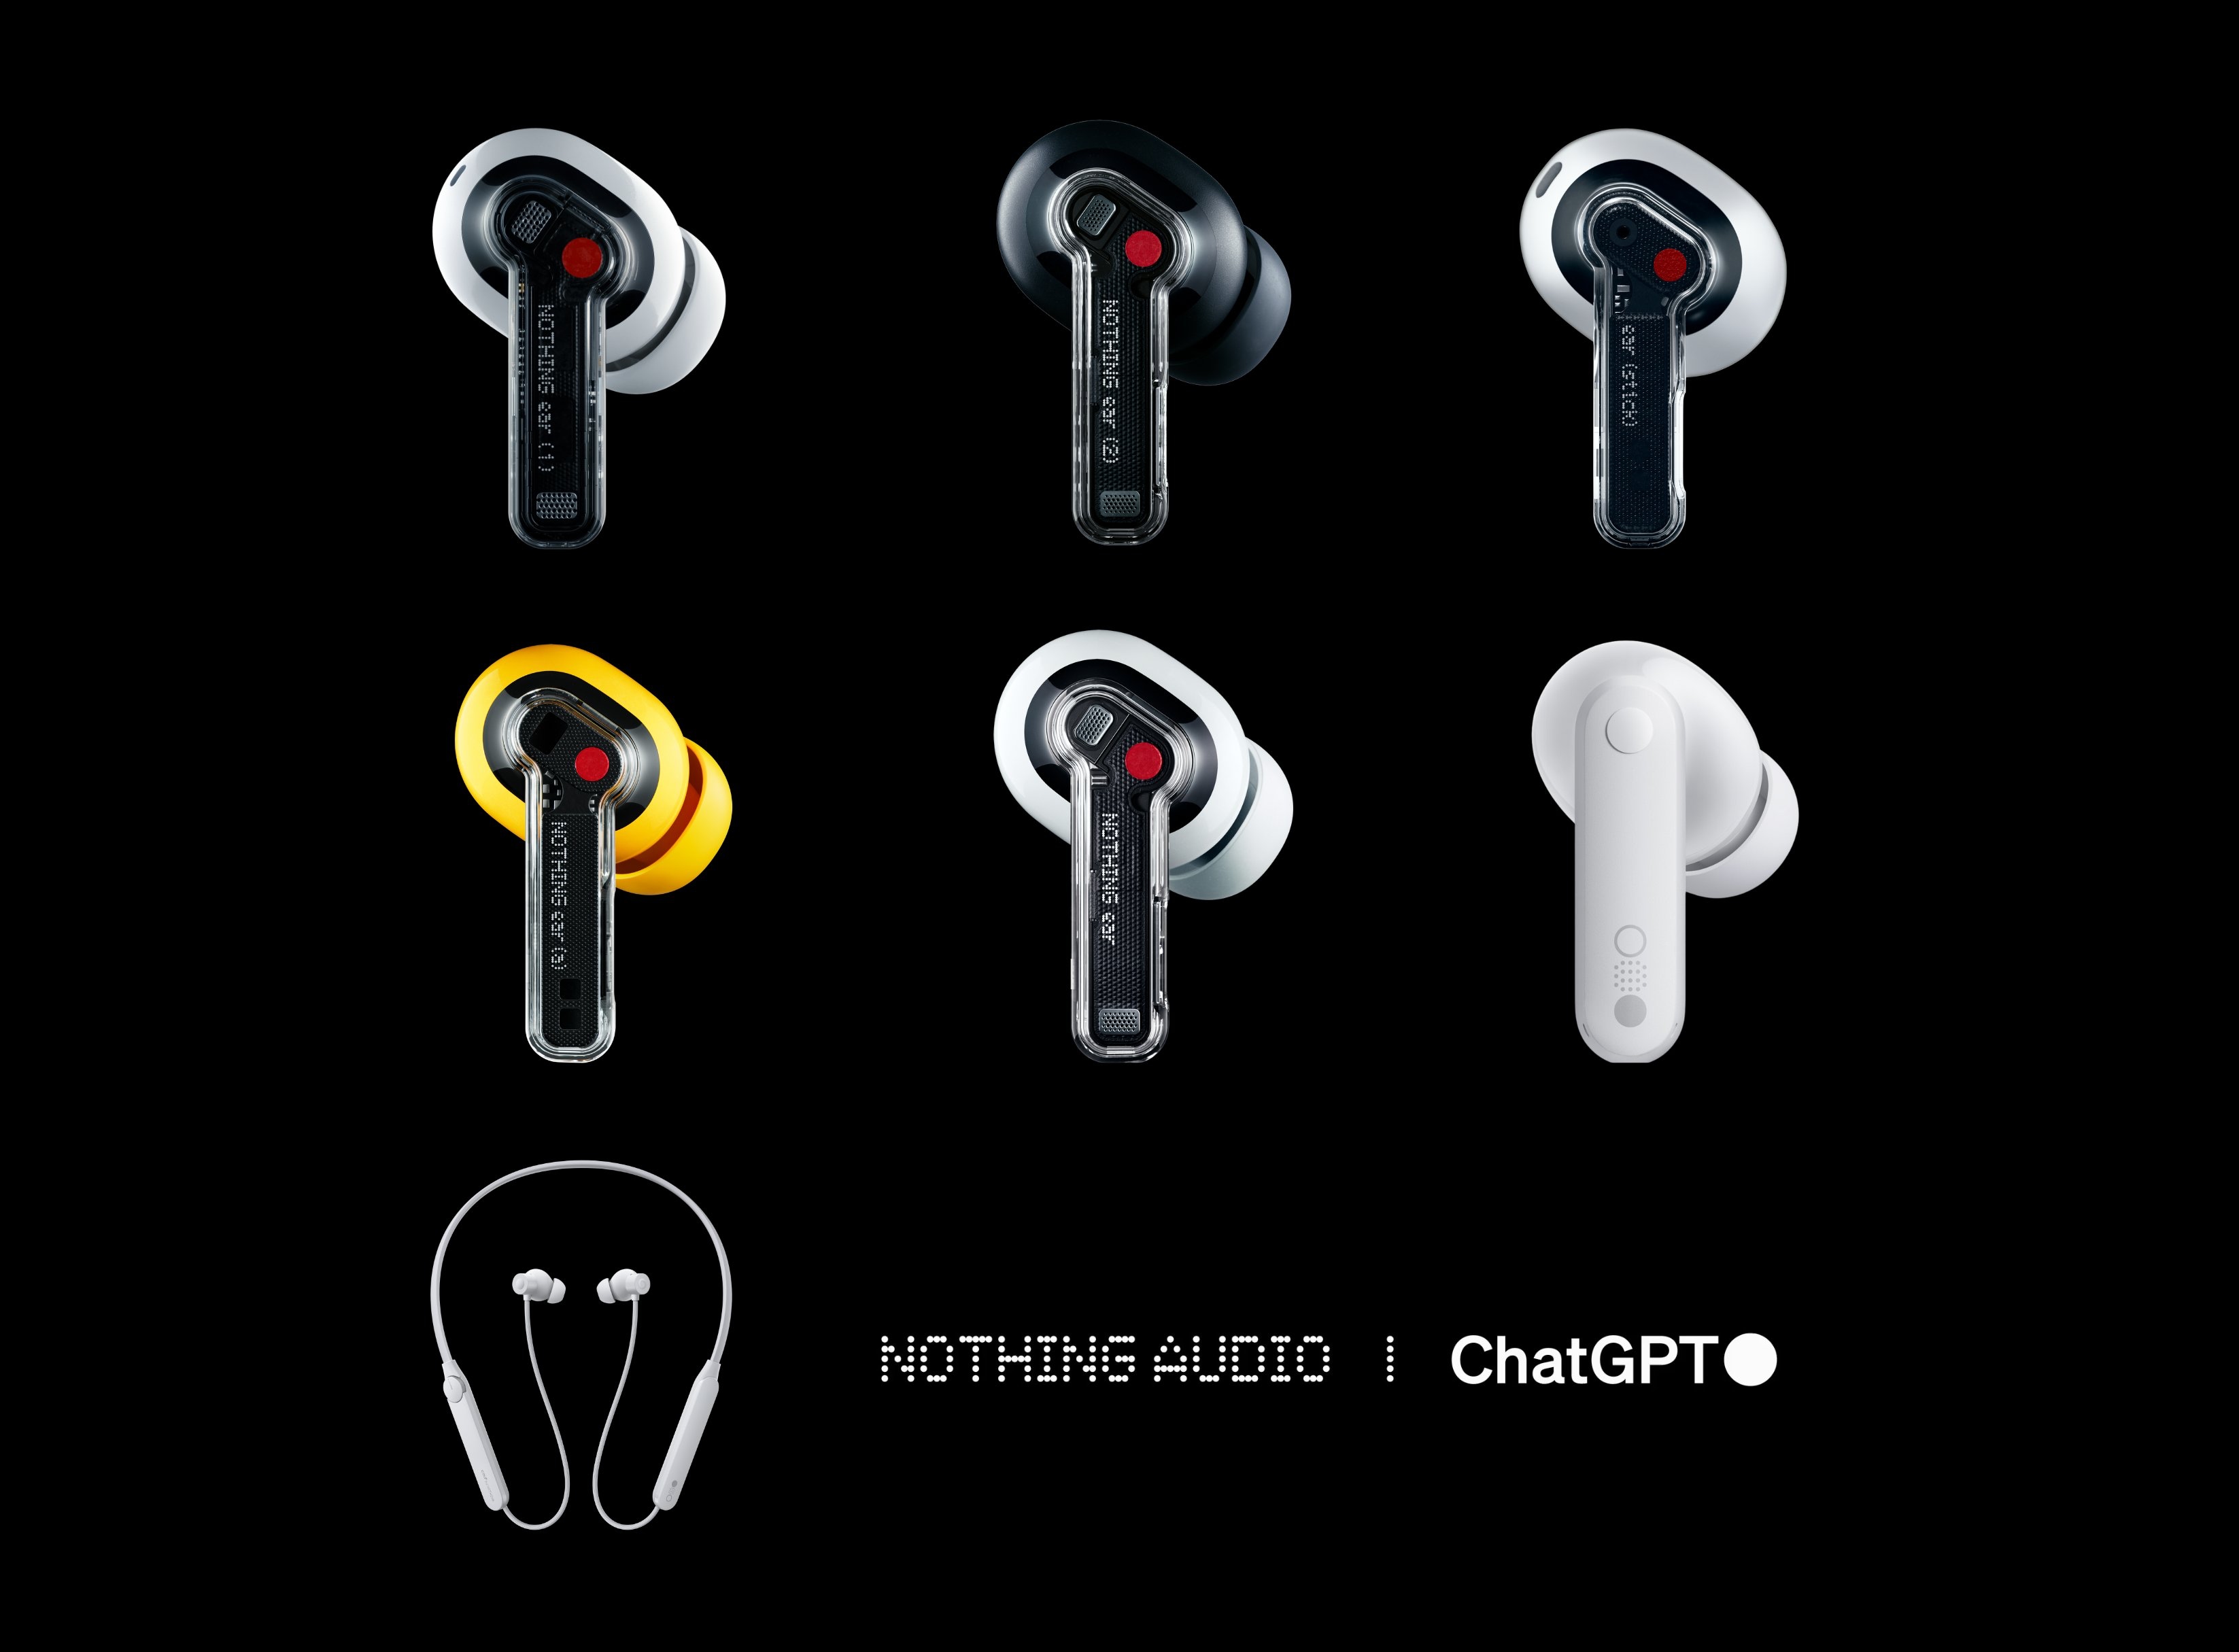 Ear (1), Ear (stick), Ear (2), CMF Buds, CMF Neckband Pro and CMF Buds Pro: Nothing's entire line of audio products will get ChatGPT integration